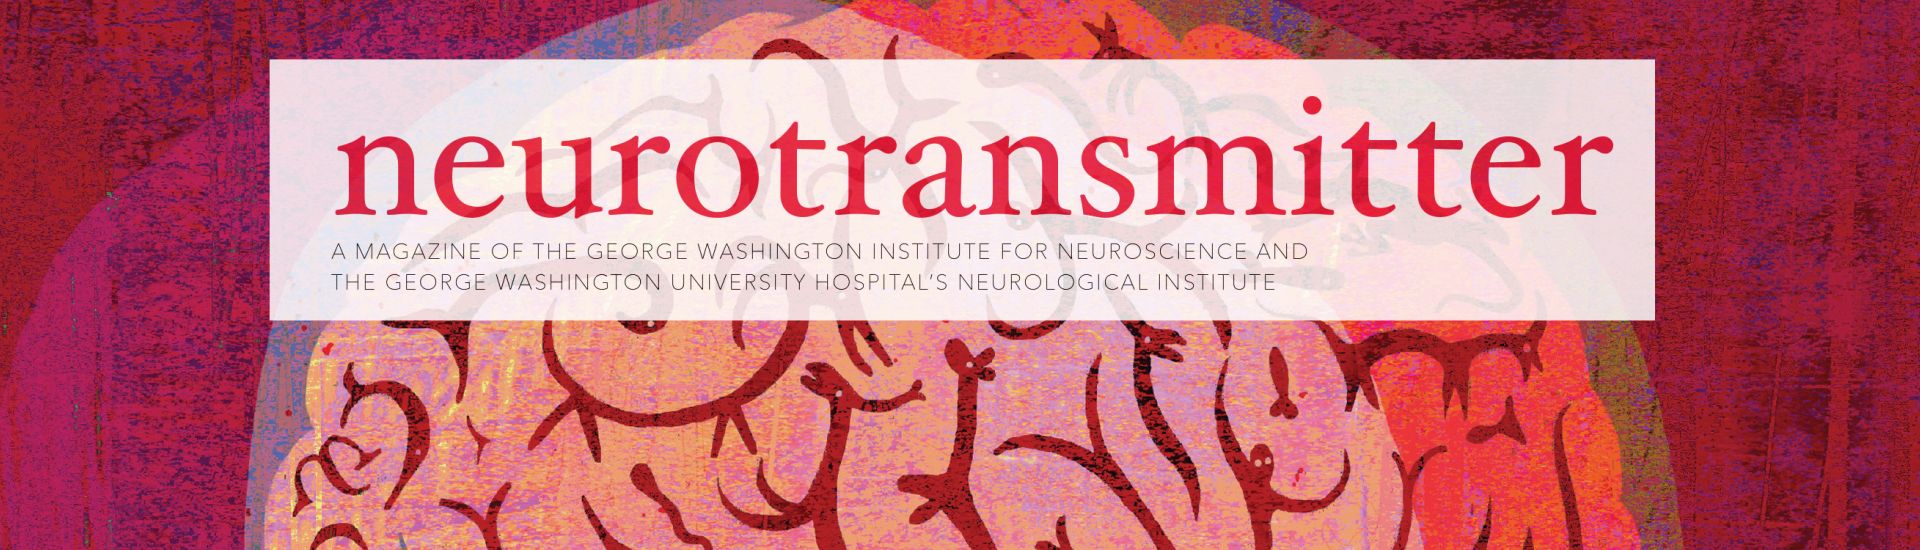 Neurotransmitter publication cover that shows an illustration of a brain